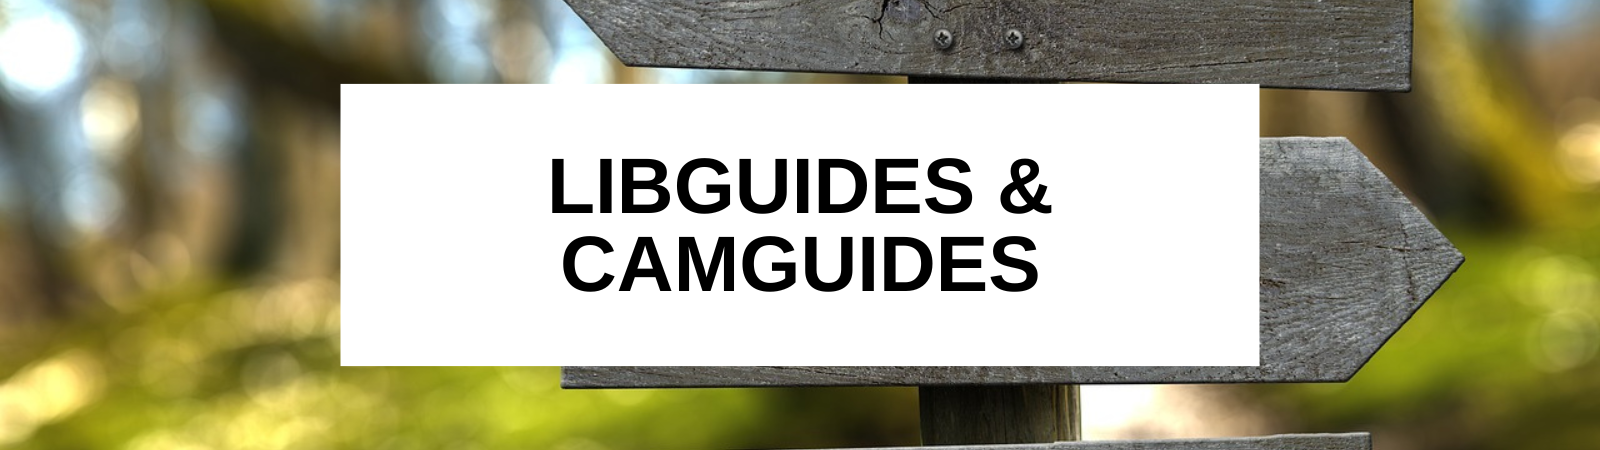 Banner image saying LibGuides & CamGuides, with a wooden signpost as the background image.